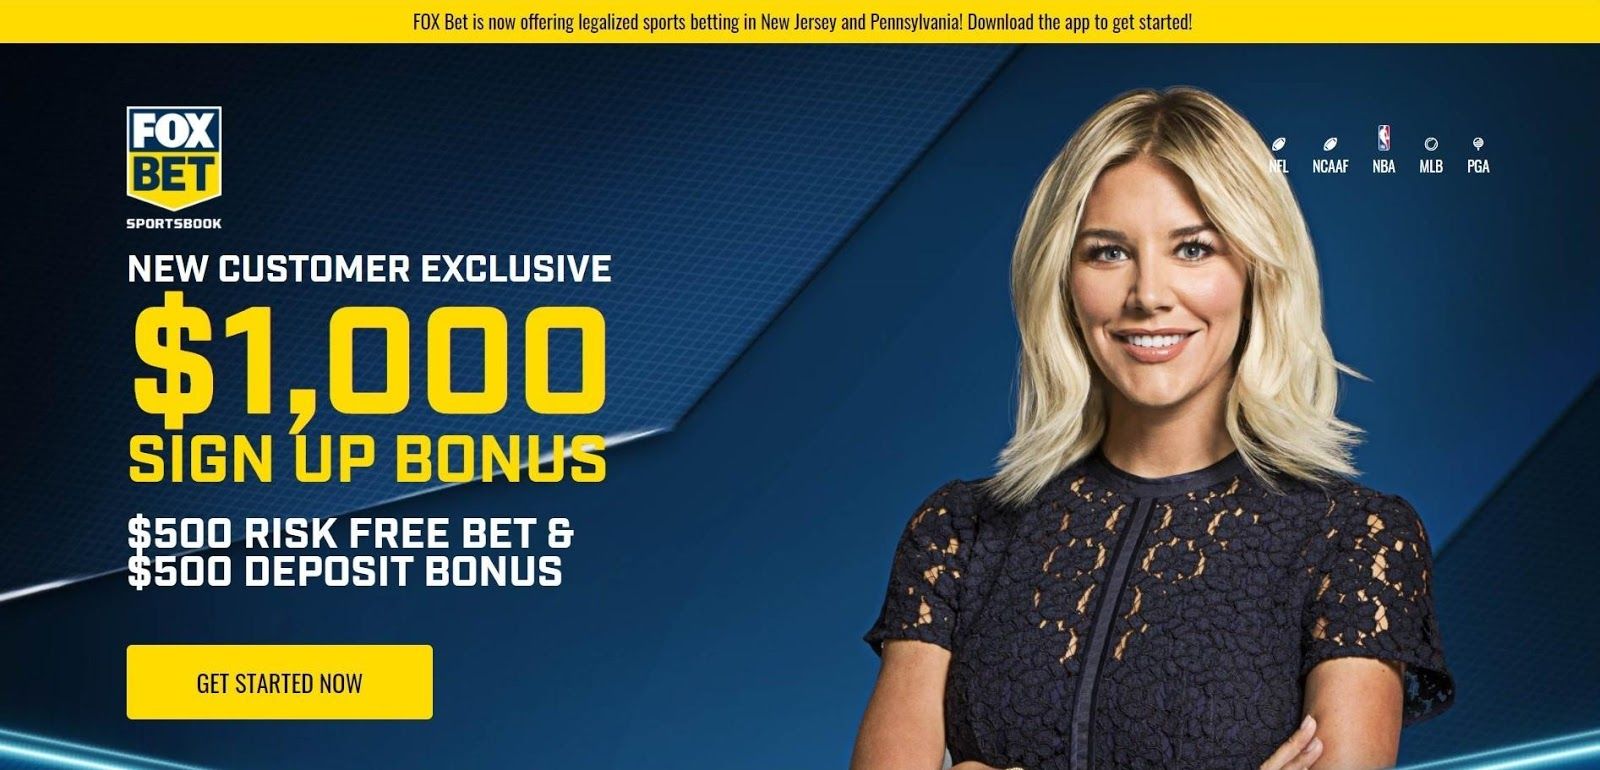 New customer exclusive sign up bonus that Fox Bet offers